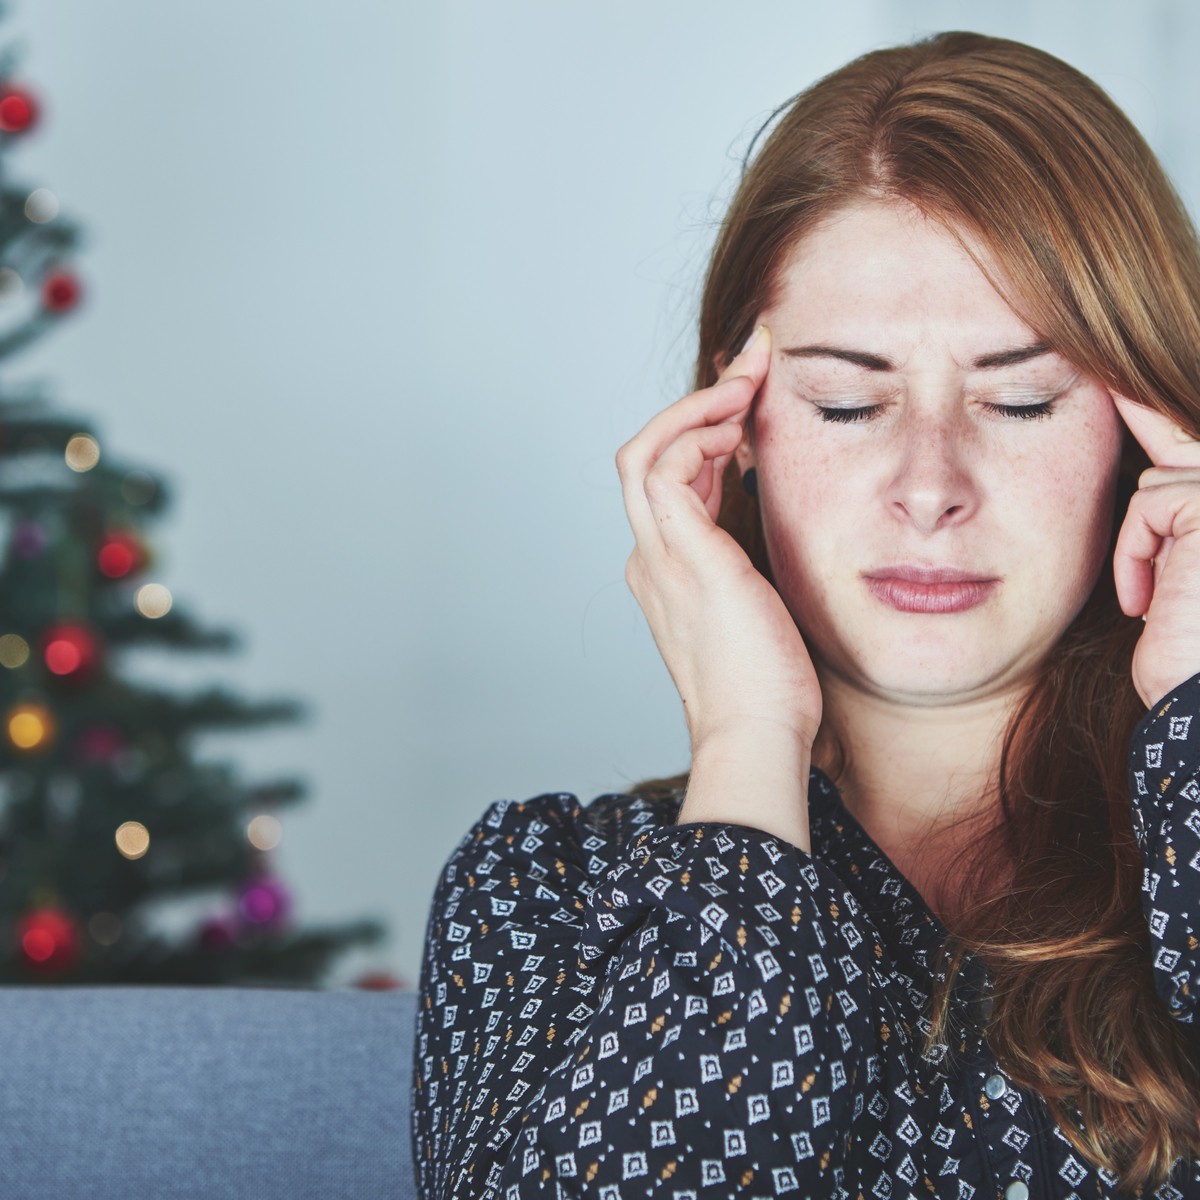 Is your Christmas turning into Stress-mas?